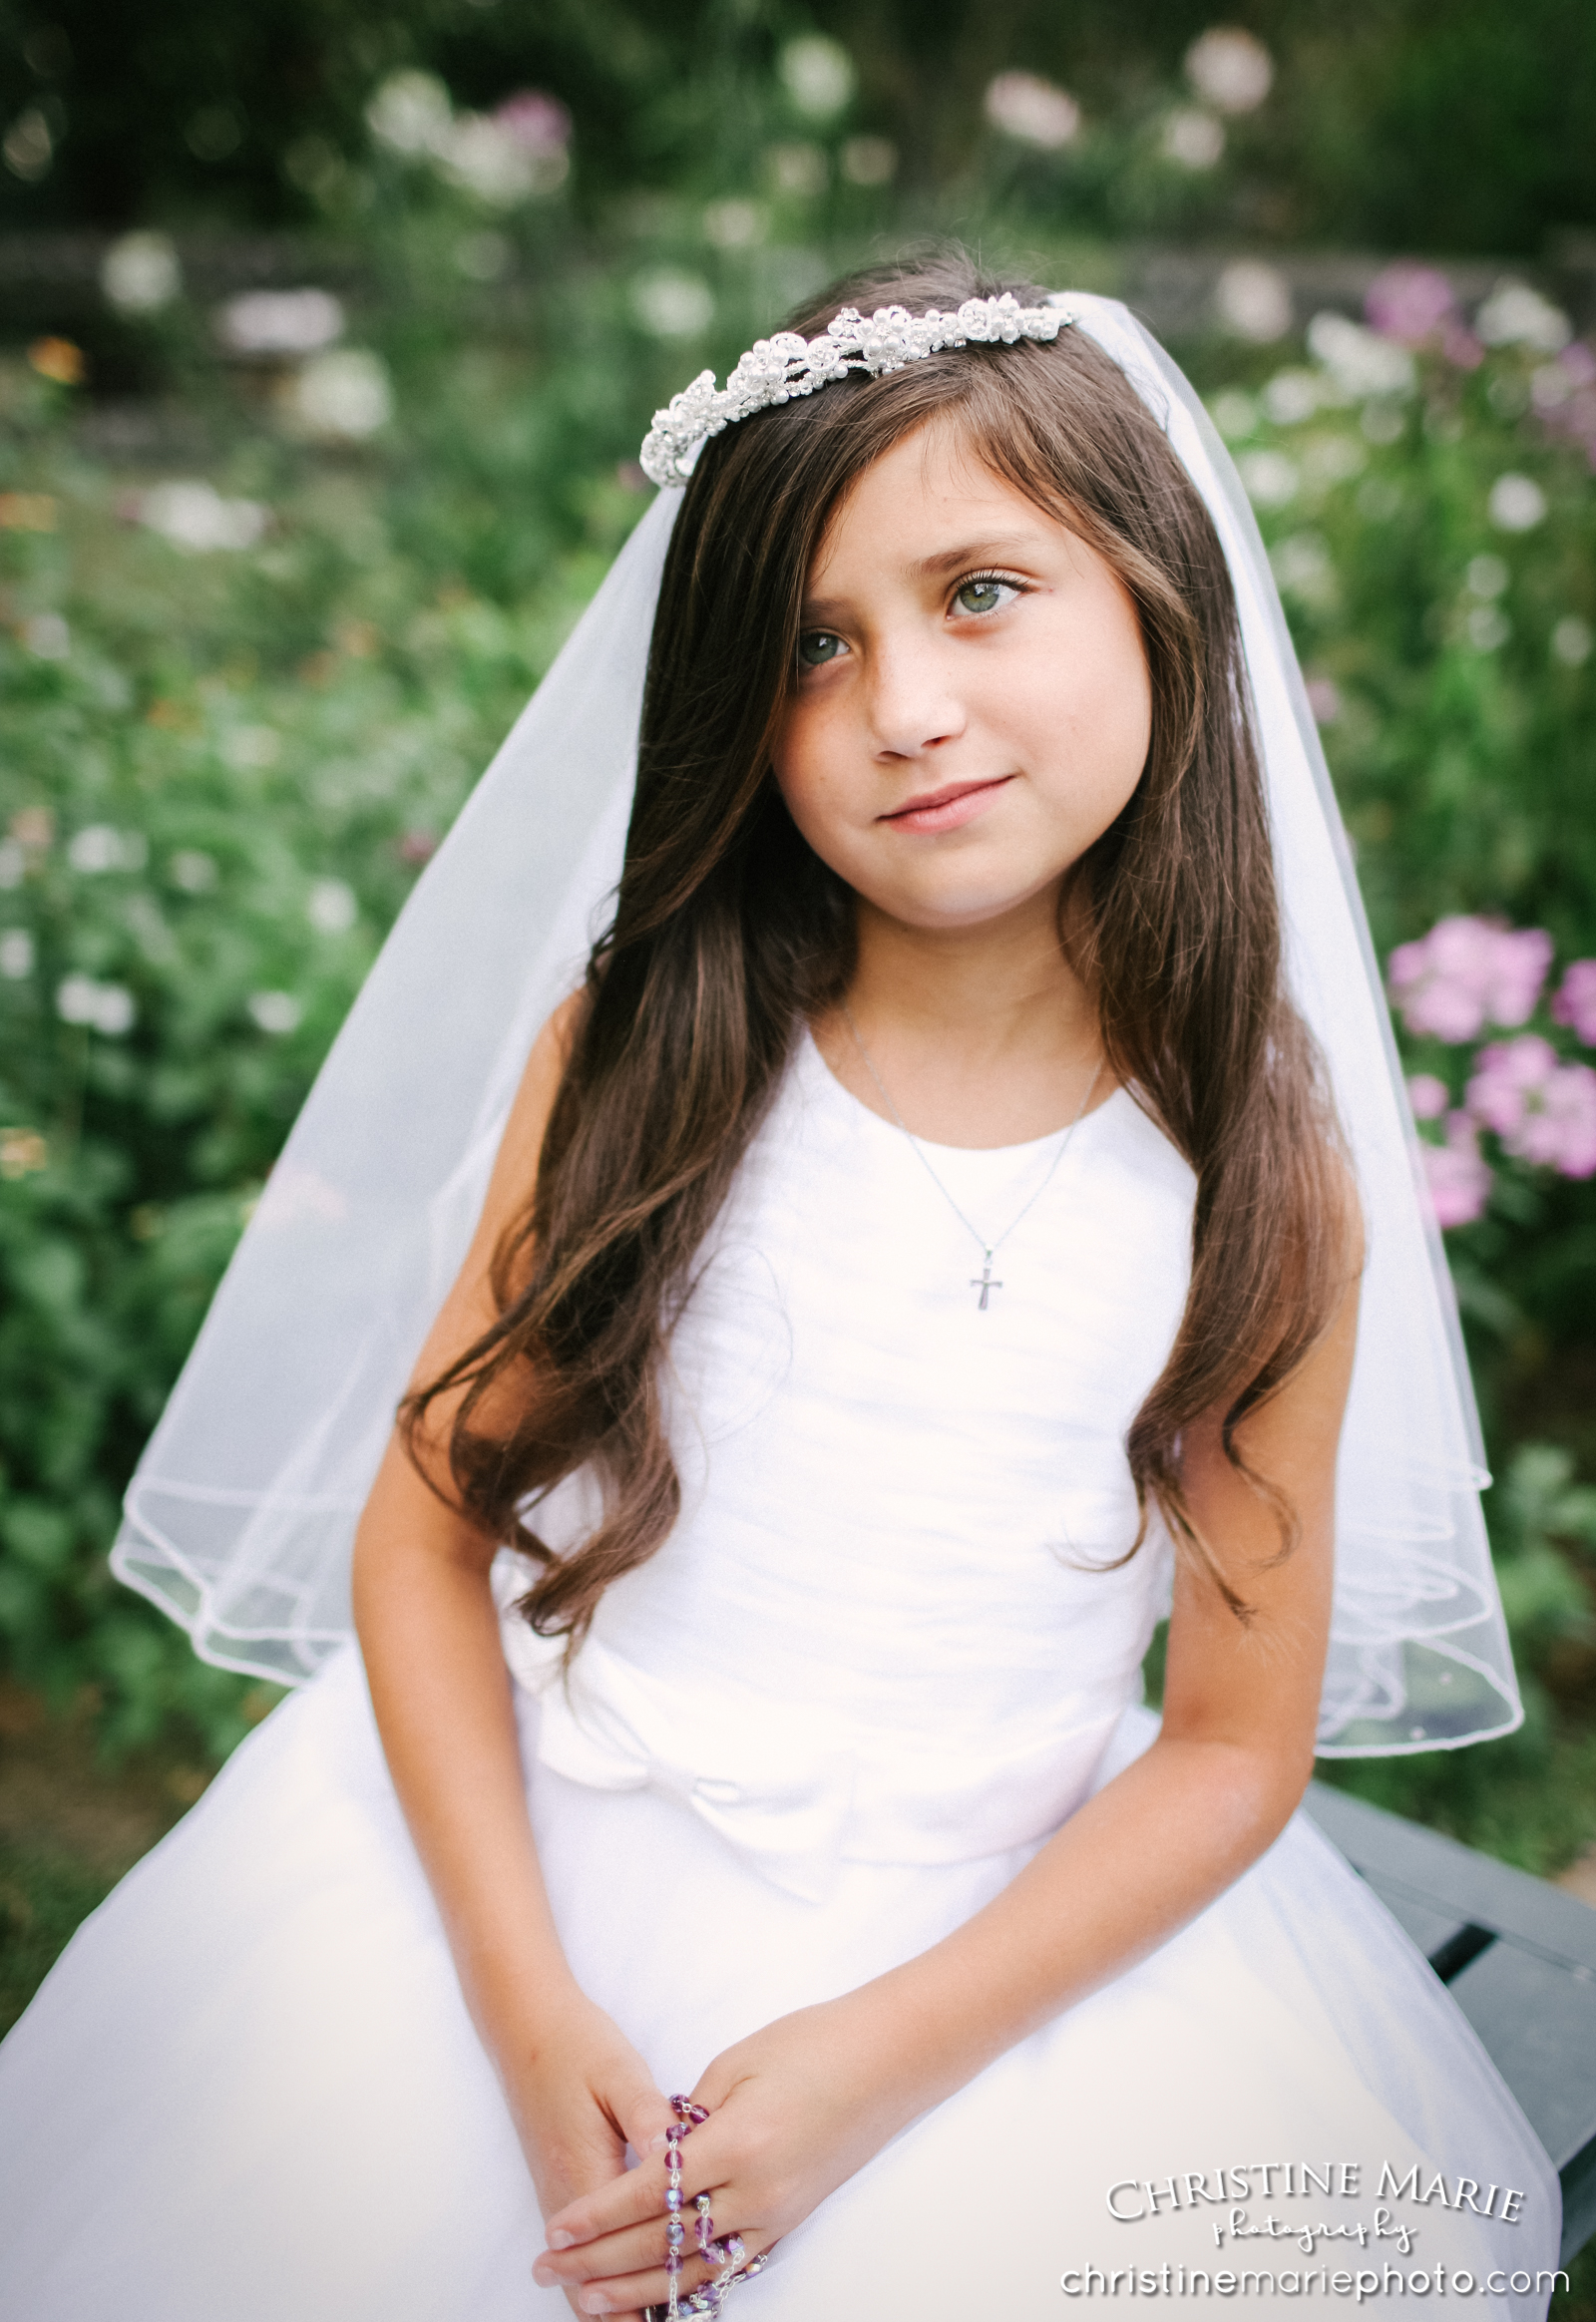 Hair Mechanics - First communion hairstyles for your... | Facebook